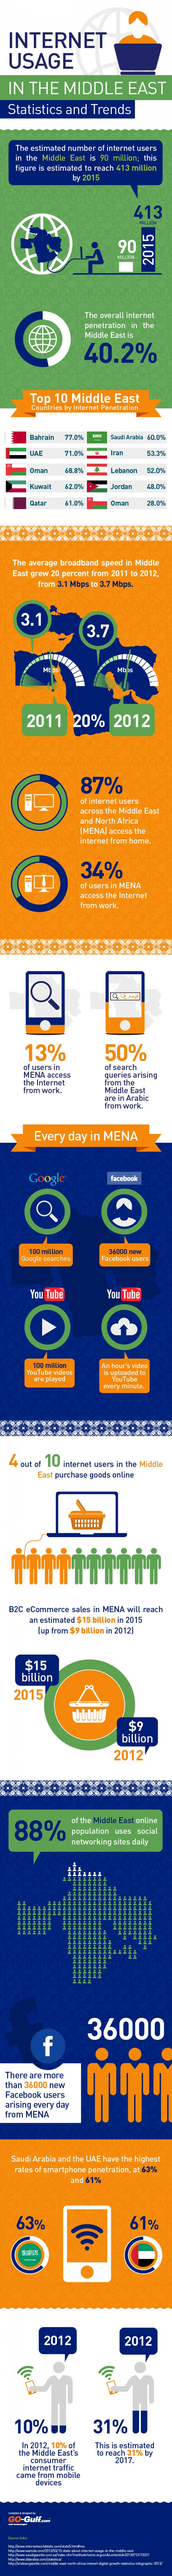 Internet Usage in The Middle East Statistics and Trends Infographic